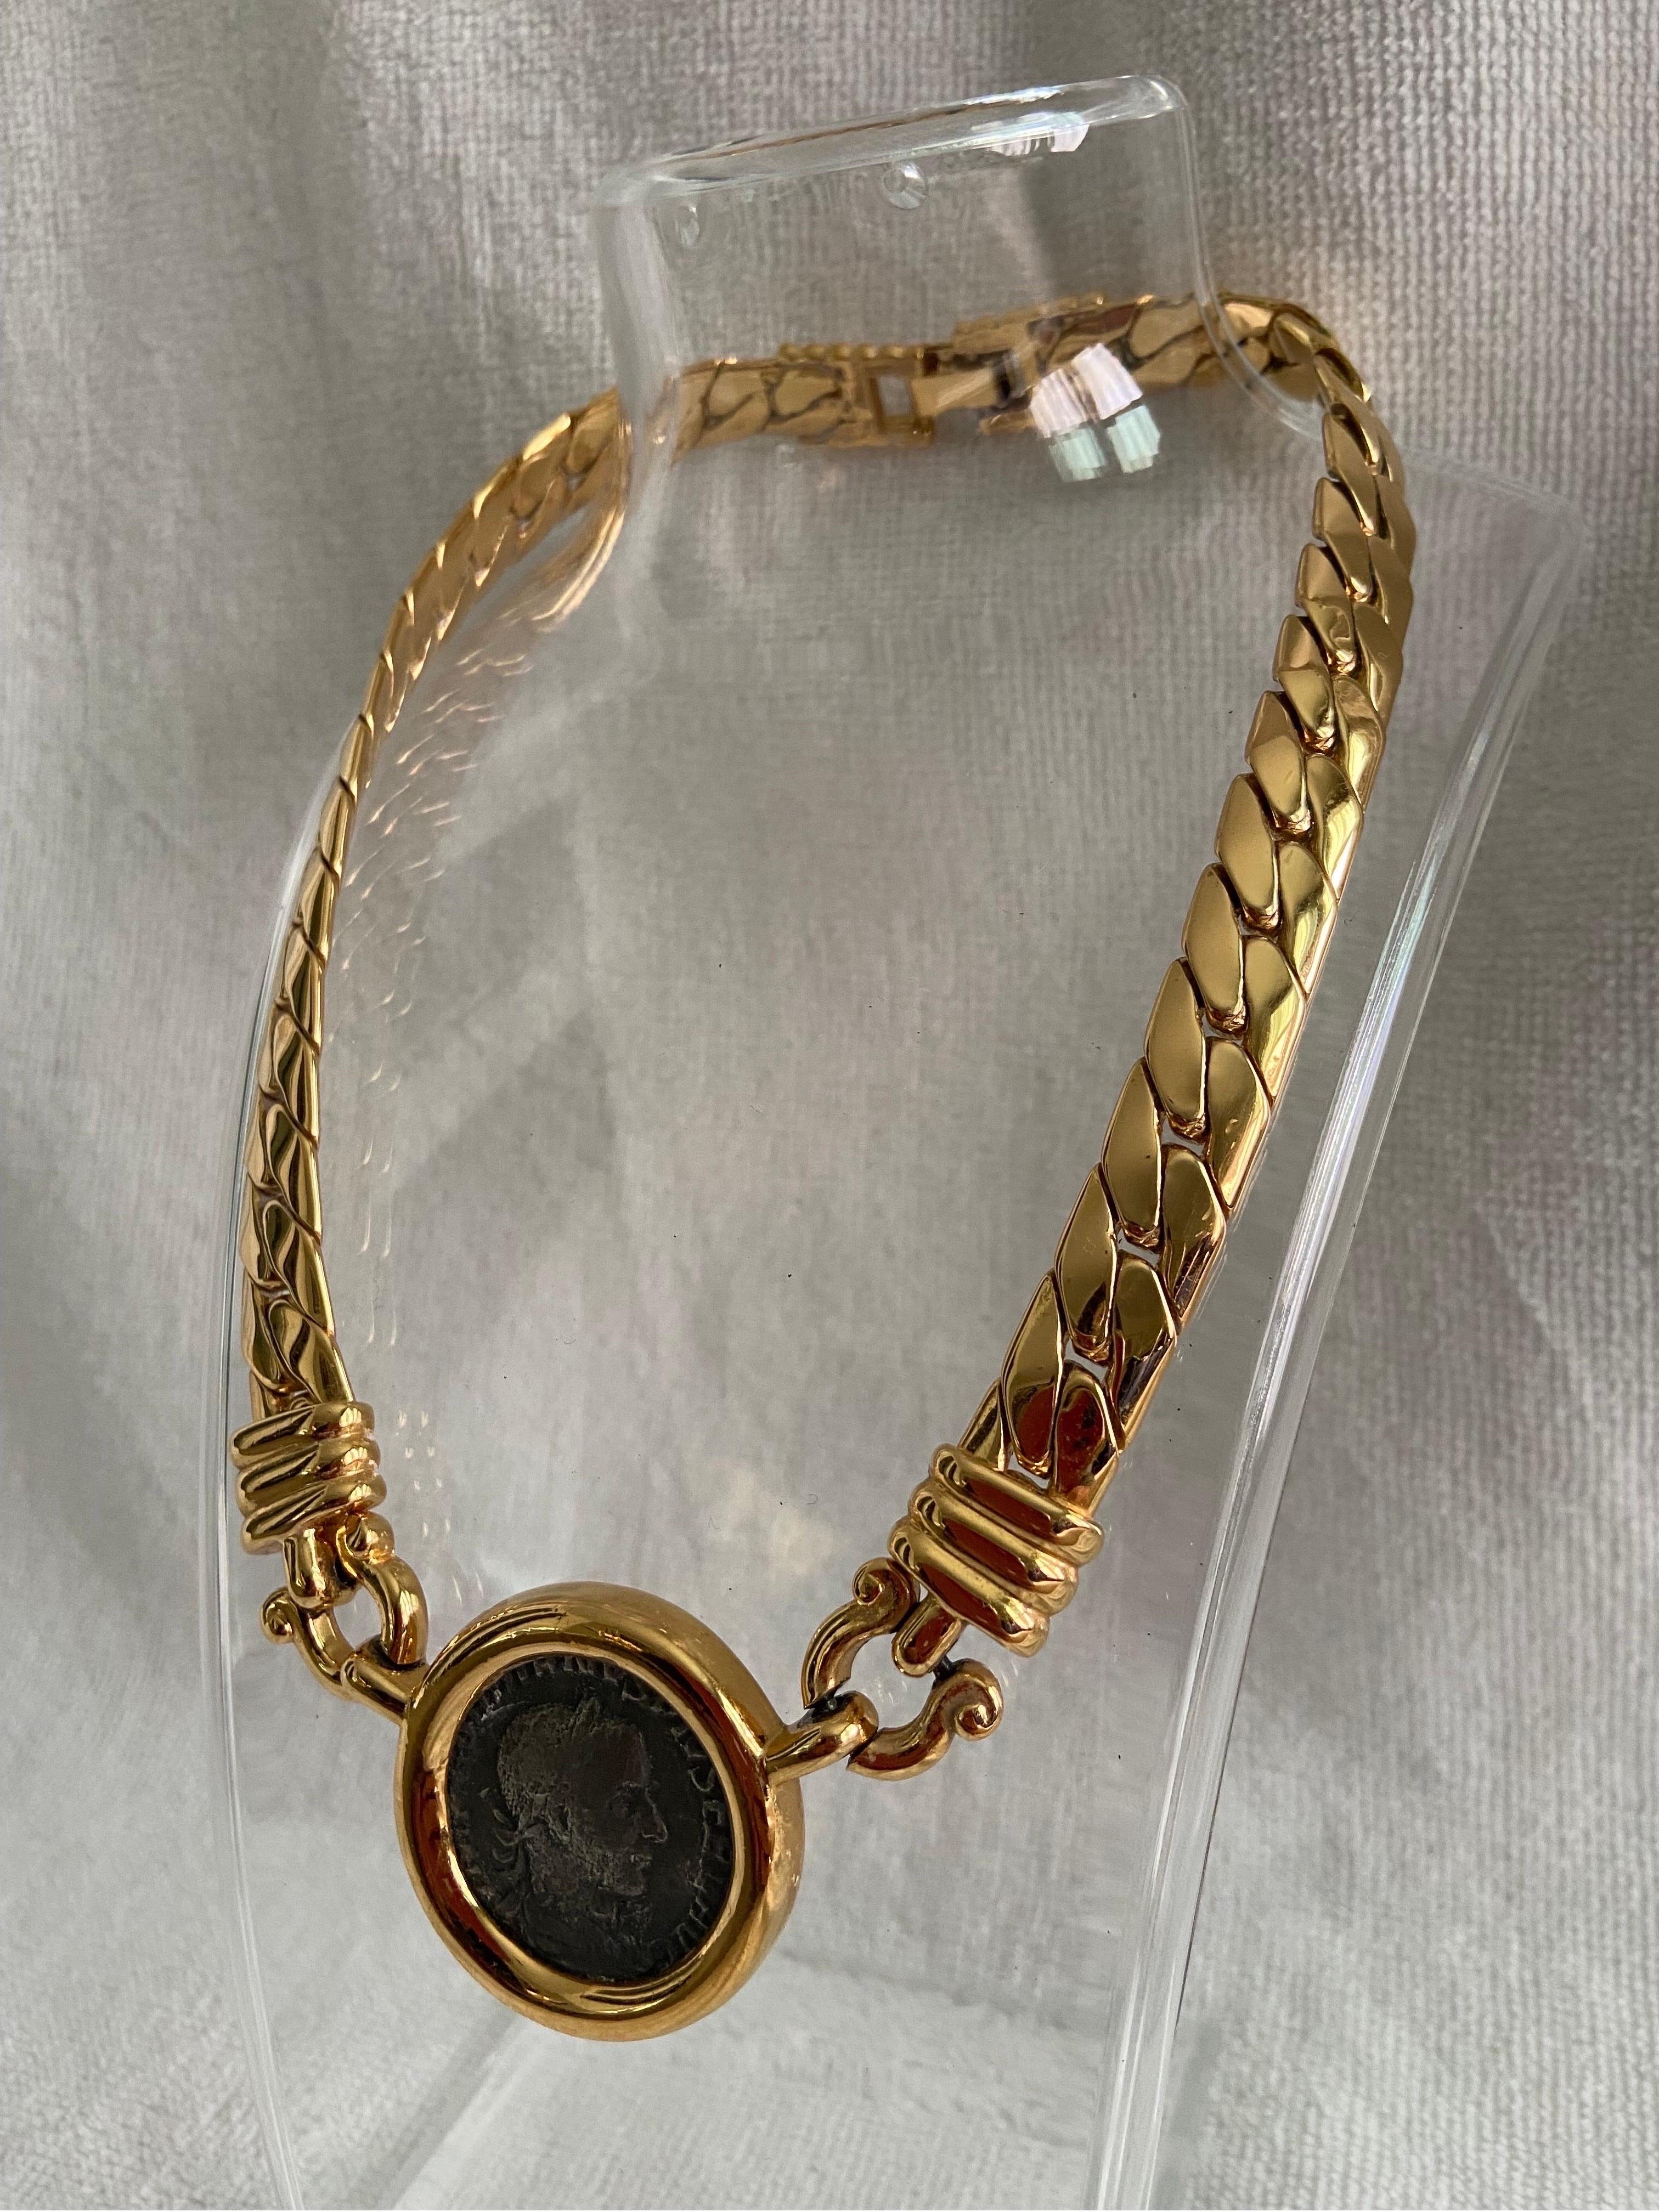 A vintage, circa 1980’s, Carolee Design faux Roman coin, gold tone Omega necklace choker. This piece is signed on the back and features a hinged clasp. The necklace is approximately 16.5” diameter. The coin is approximately 1.5” in diameter. For a